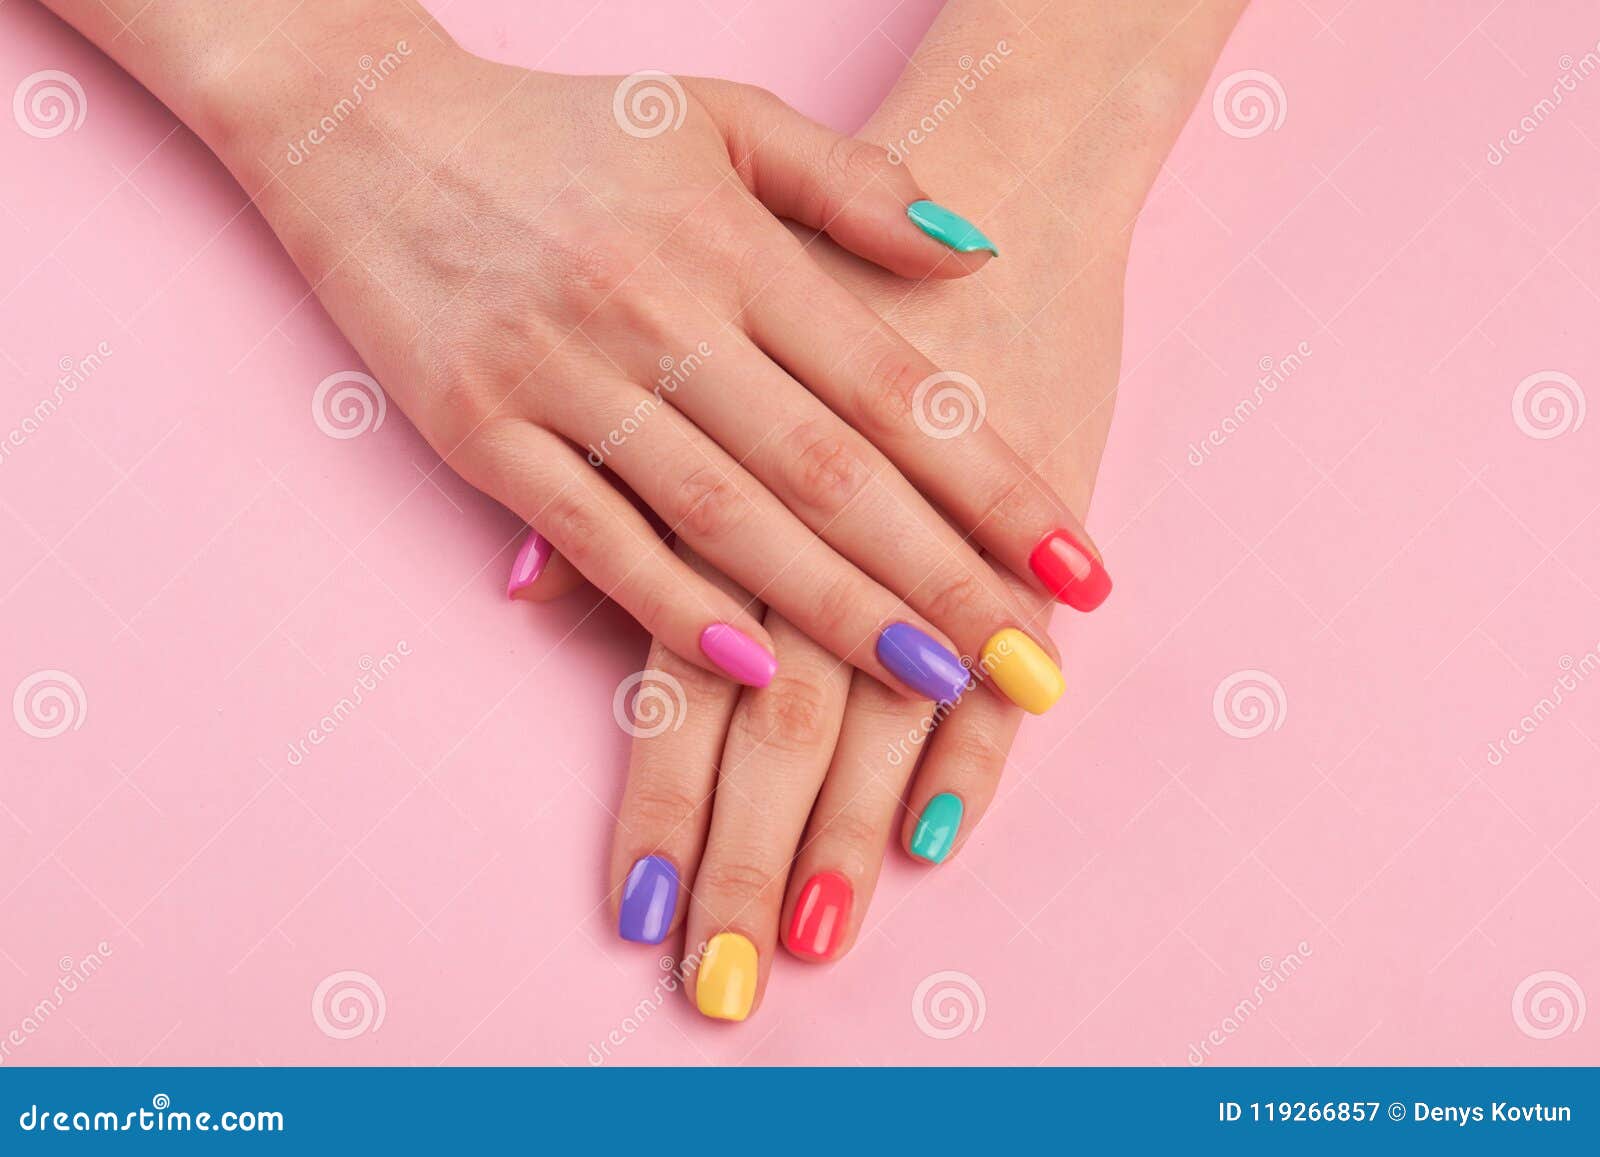 Female Hands with Colorful Polish Nails. Stock Image - Image of ...